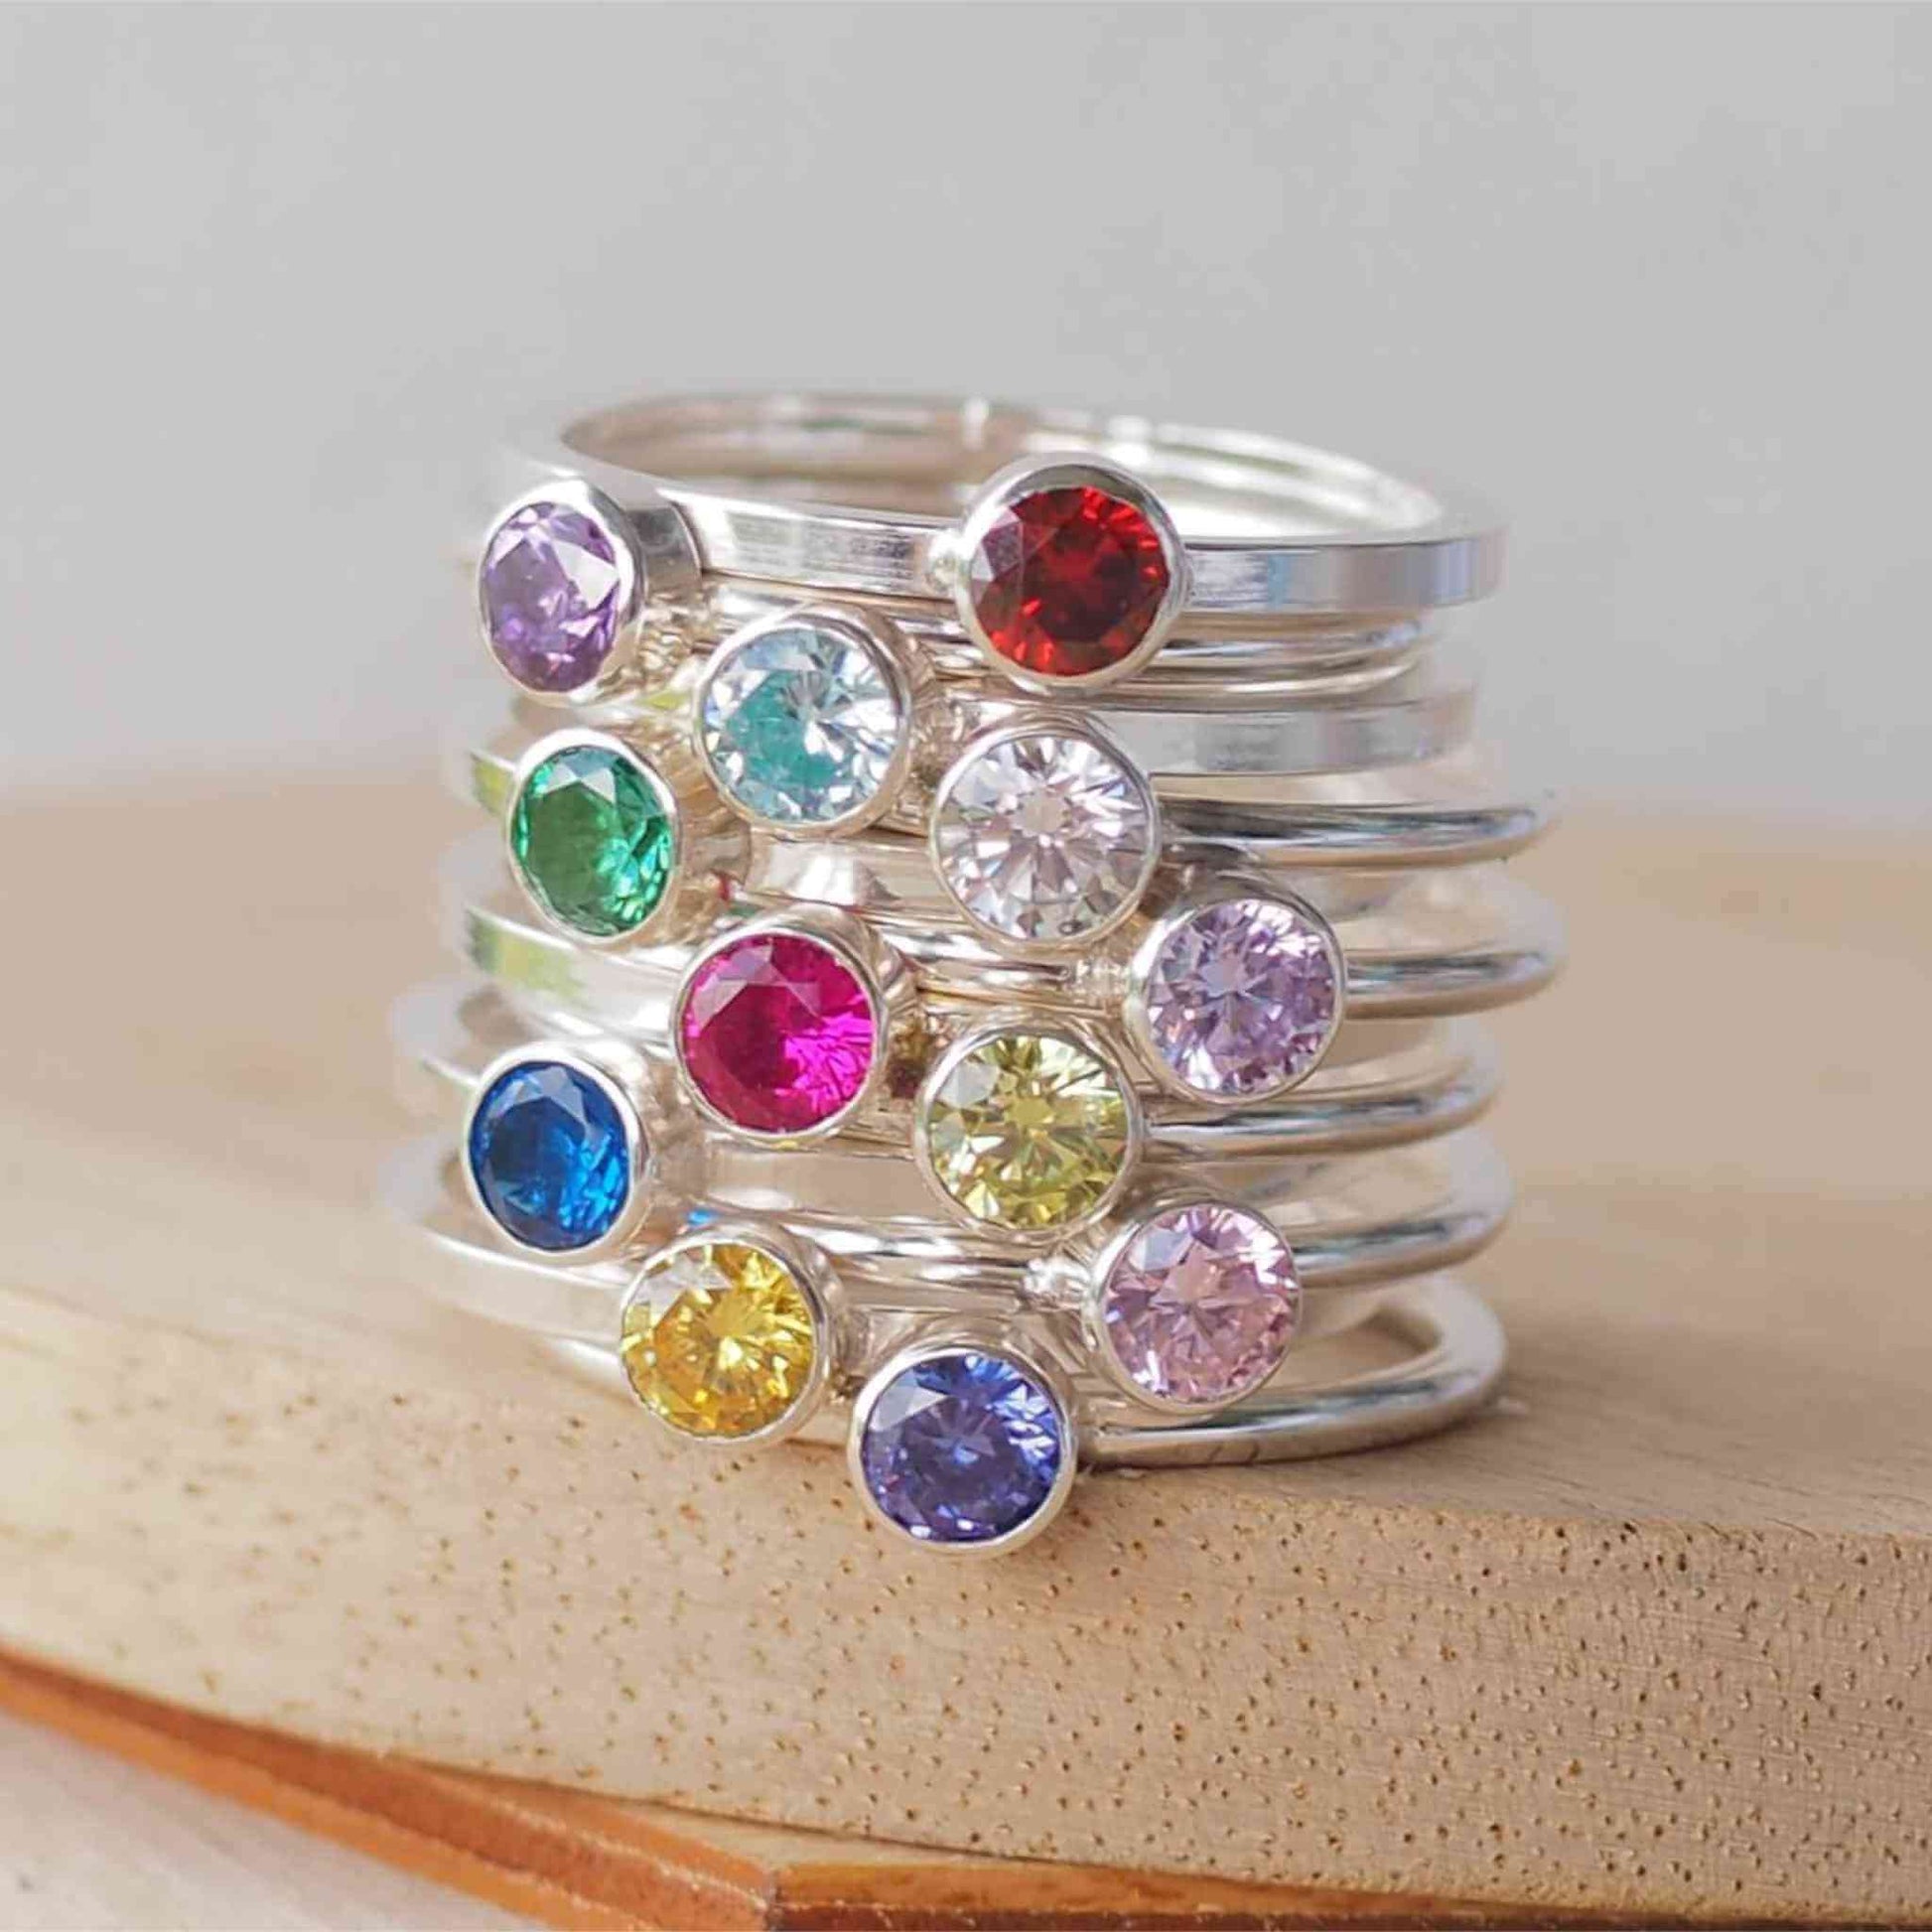 Stack of twelve birthstone rings in Sterling Silver with a round coloured cubic zirconia in 4mm size to mark birthstones for every month. Rainbow bright coloured gems with round or square silver bands to create a modern minimalist gemstone ring. Handmade in Scotland by maram jewellery